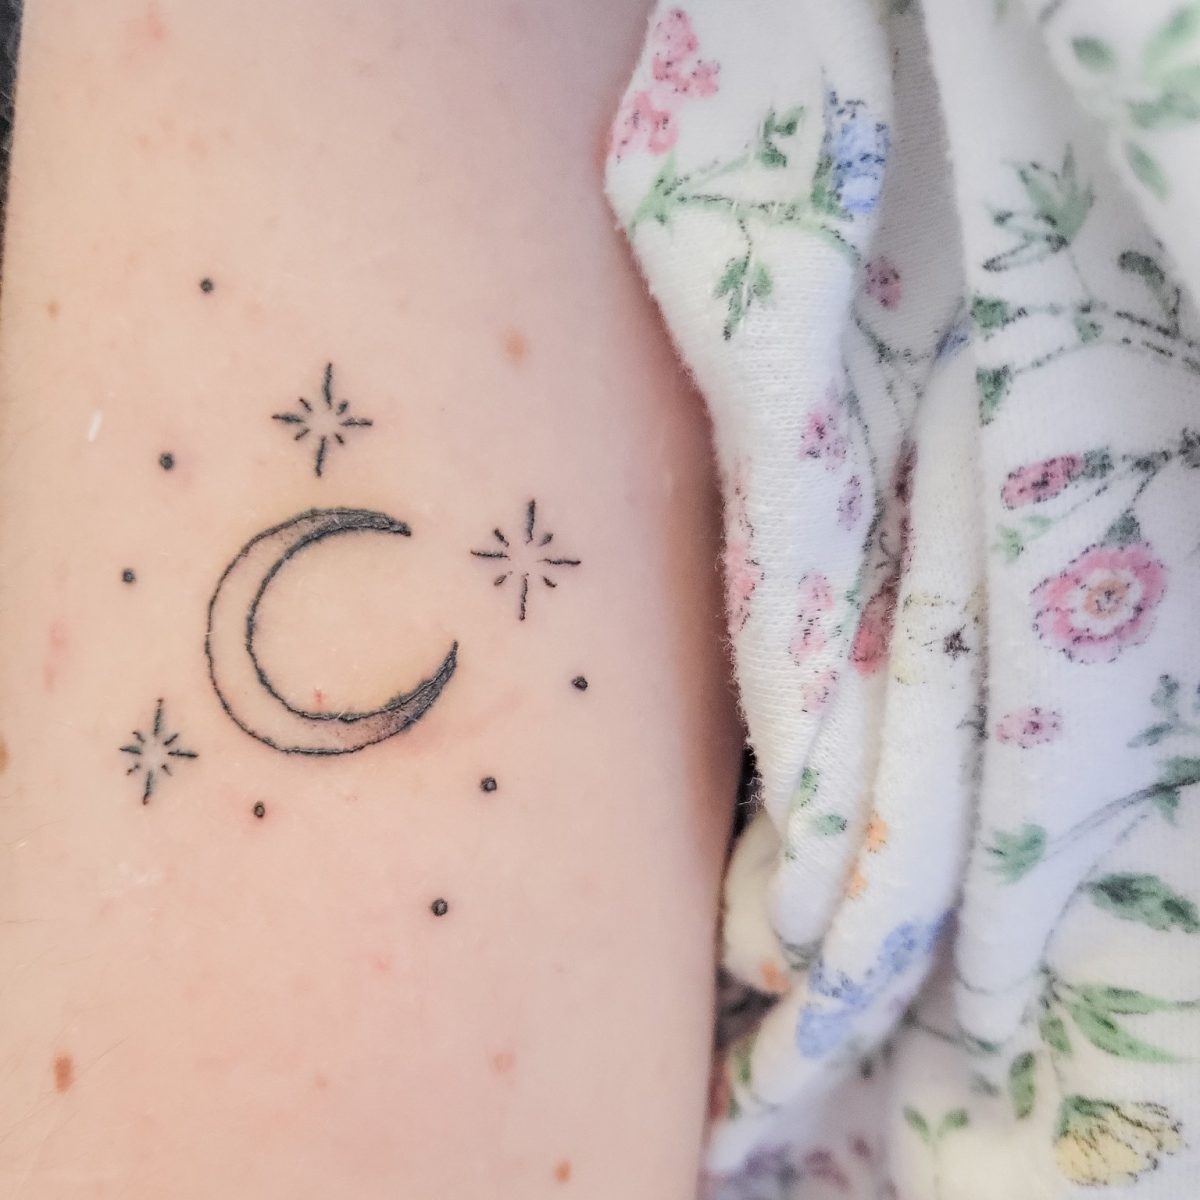 My New Tattoo Is a Dream Come True | SMA News Today